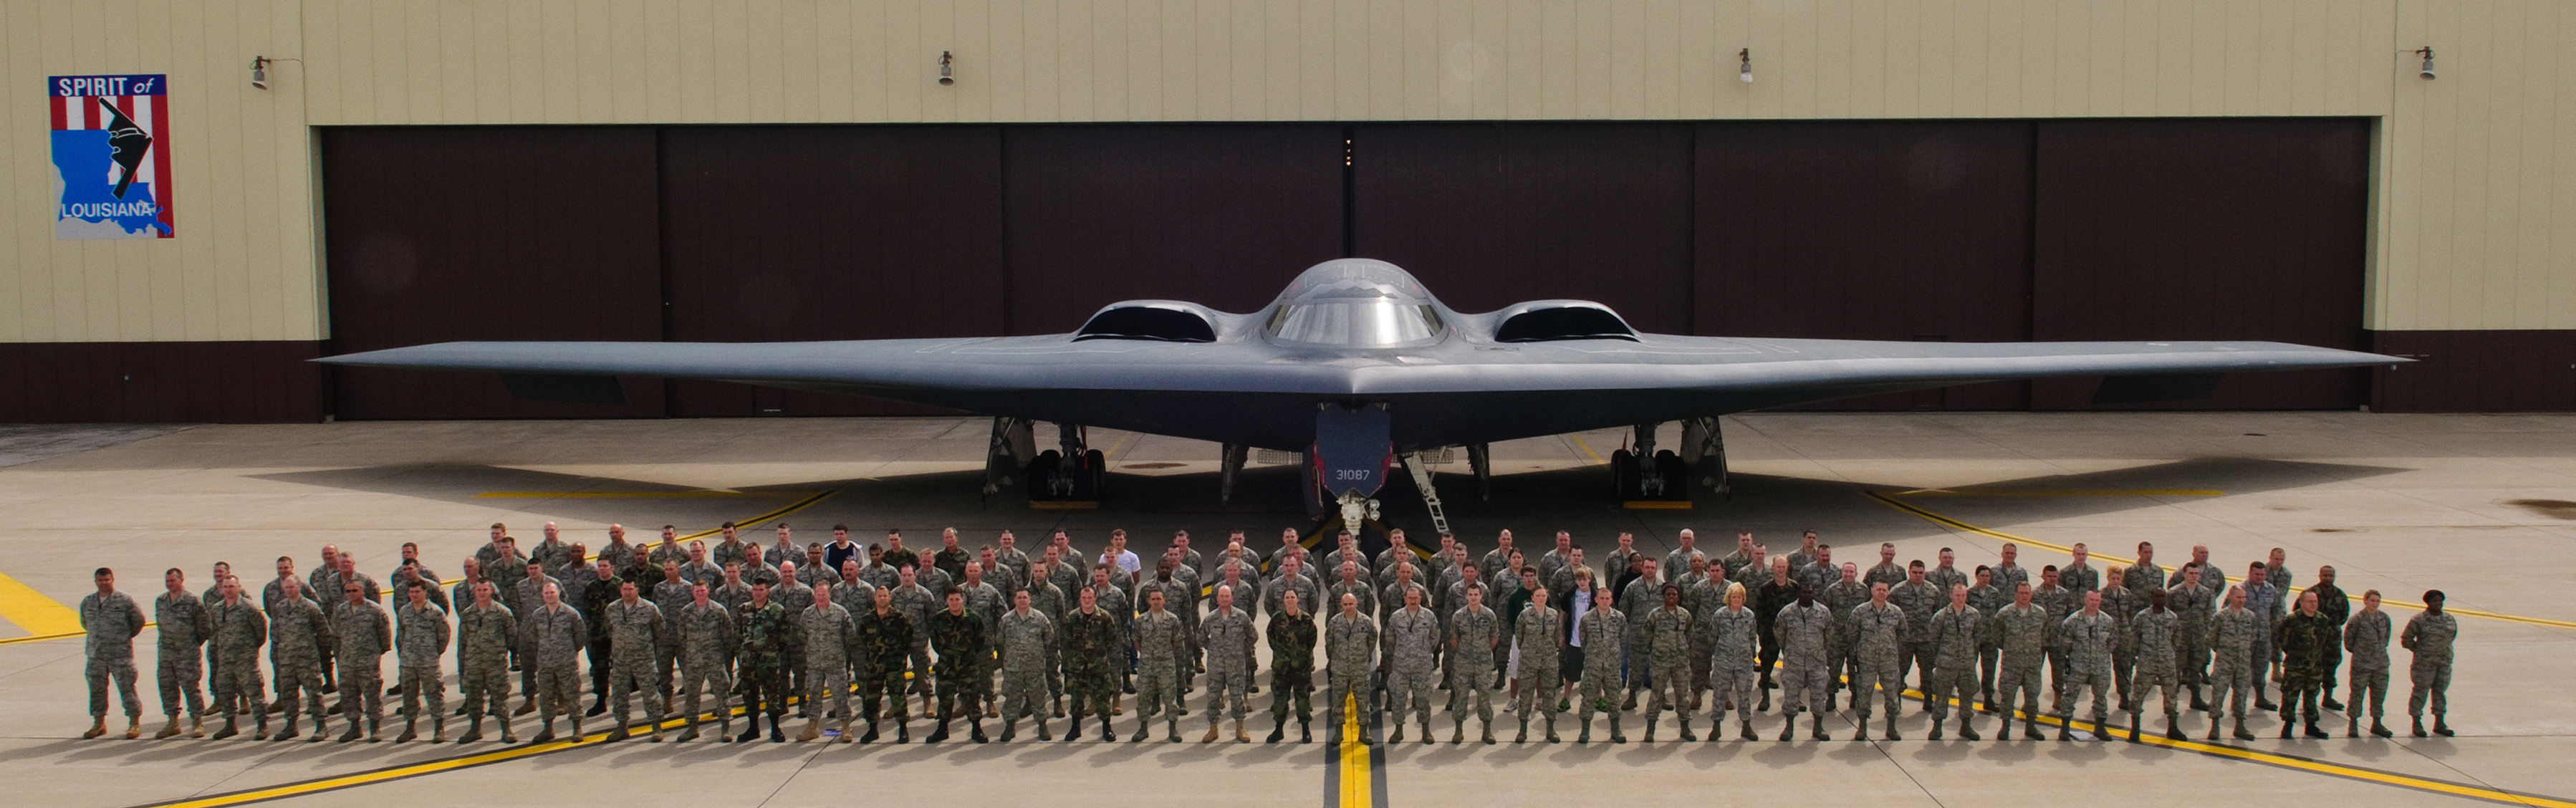 Group photo of approximately 120 Airmen standing in formation in front of a B-2 Spirit stealth bomber.